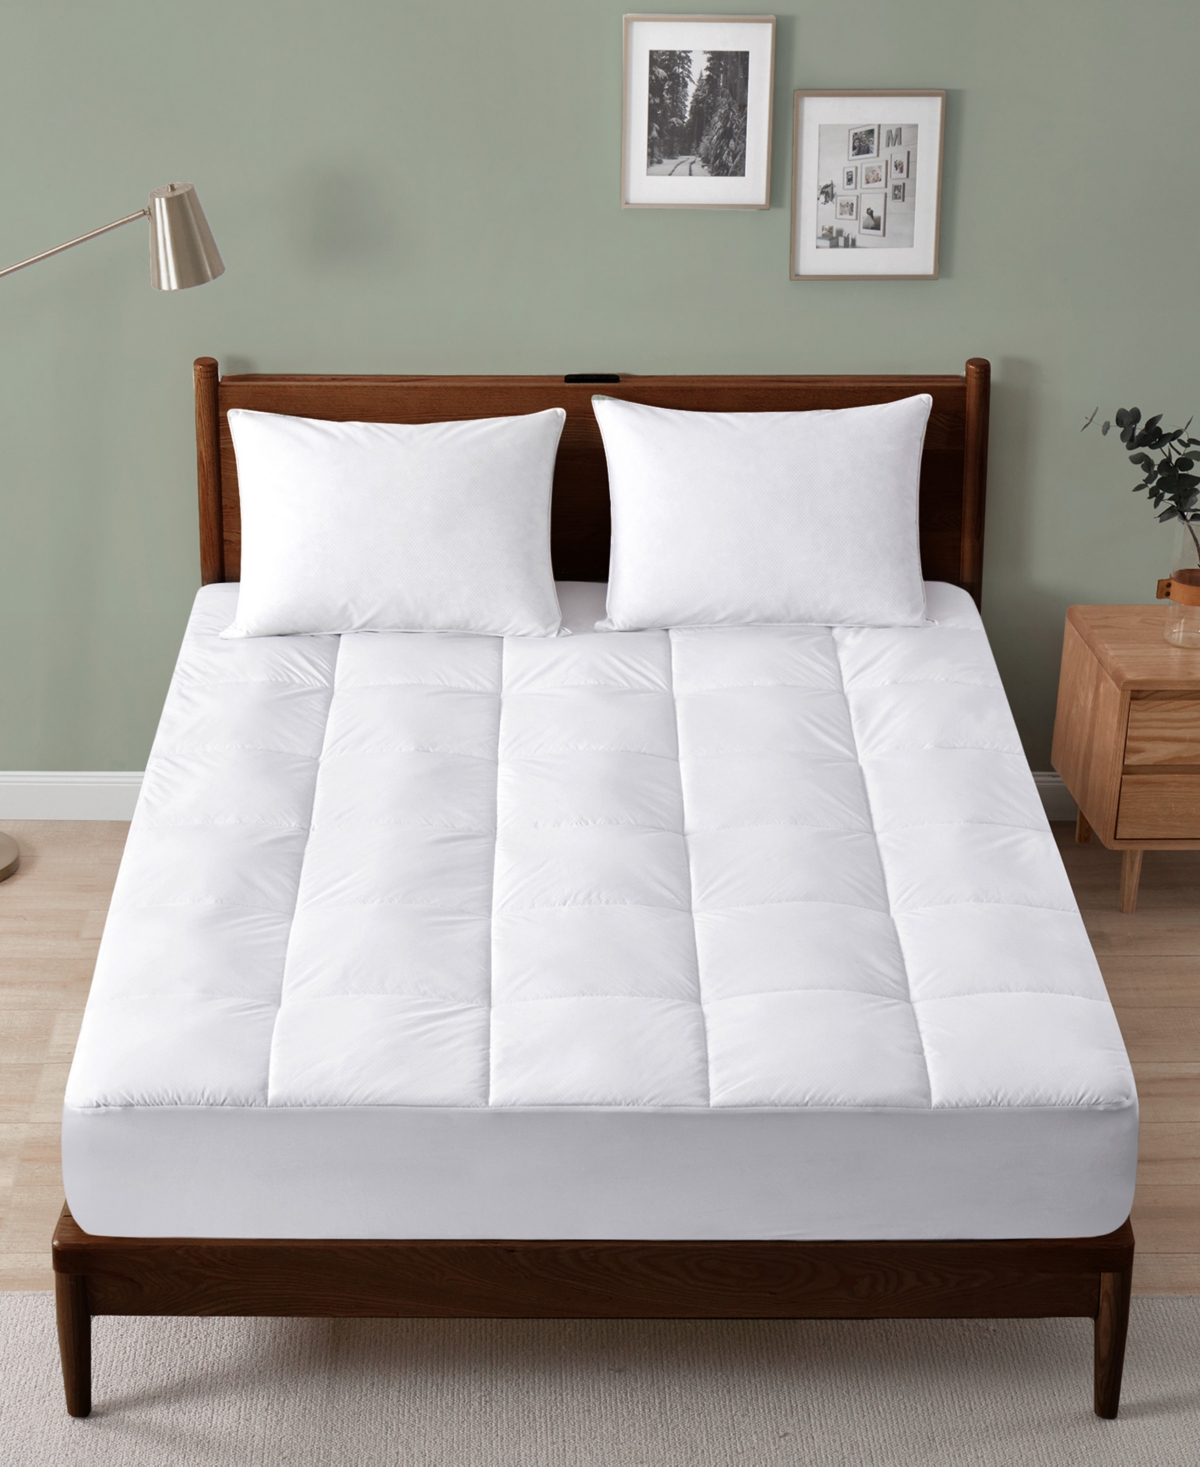 Shop Unikome 18" Deep Ice Cooling Mattress Pad, Queen In White